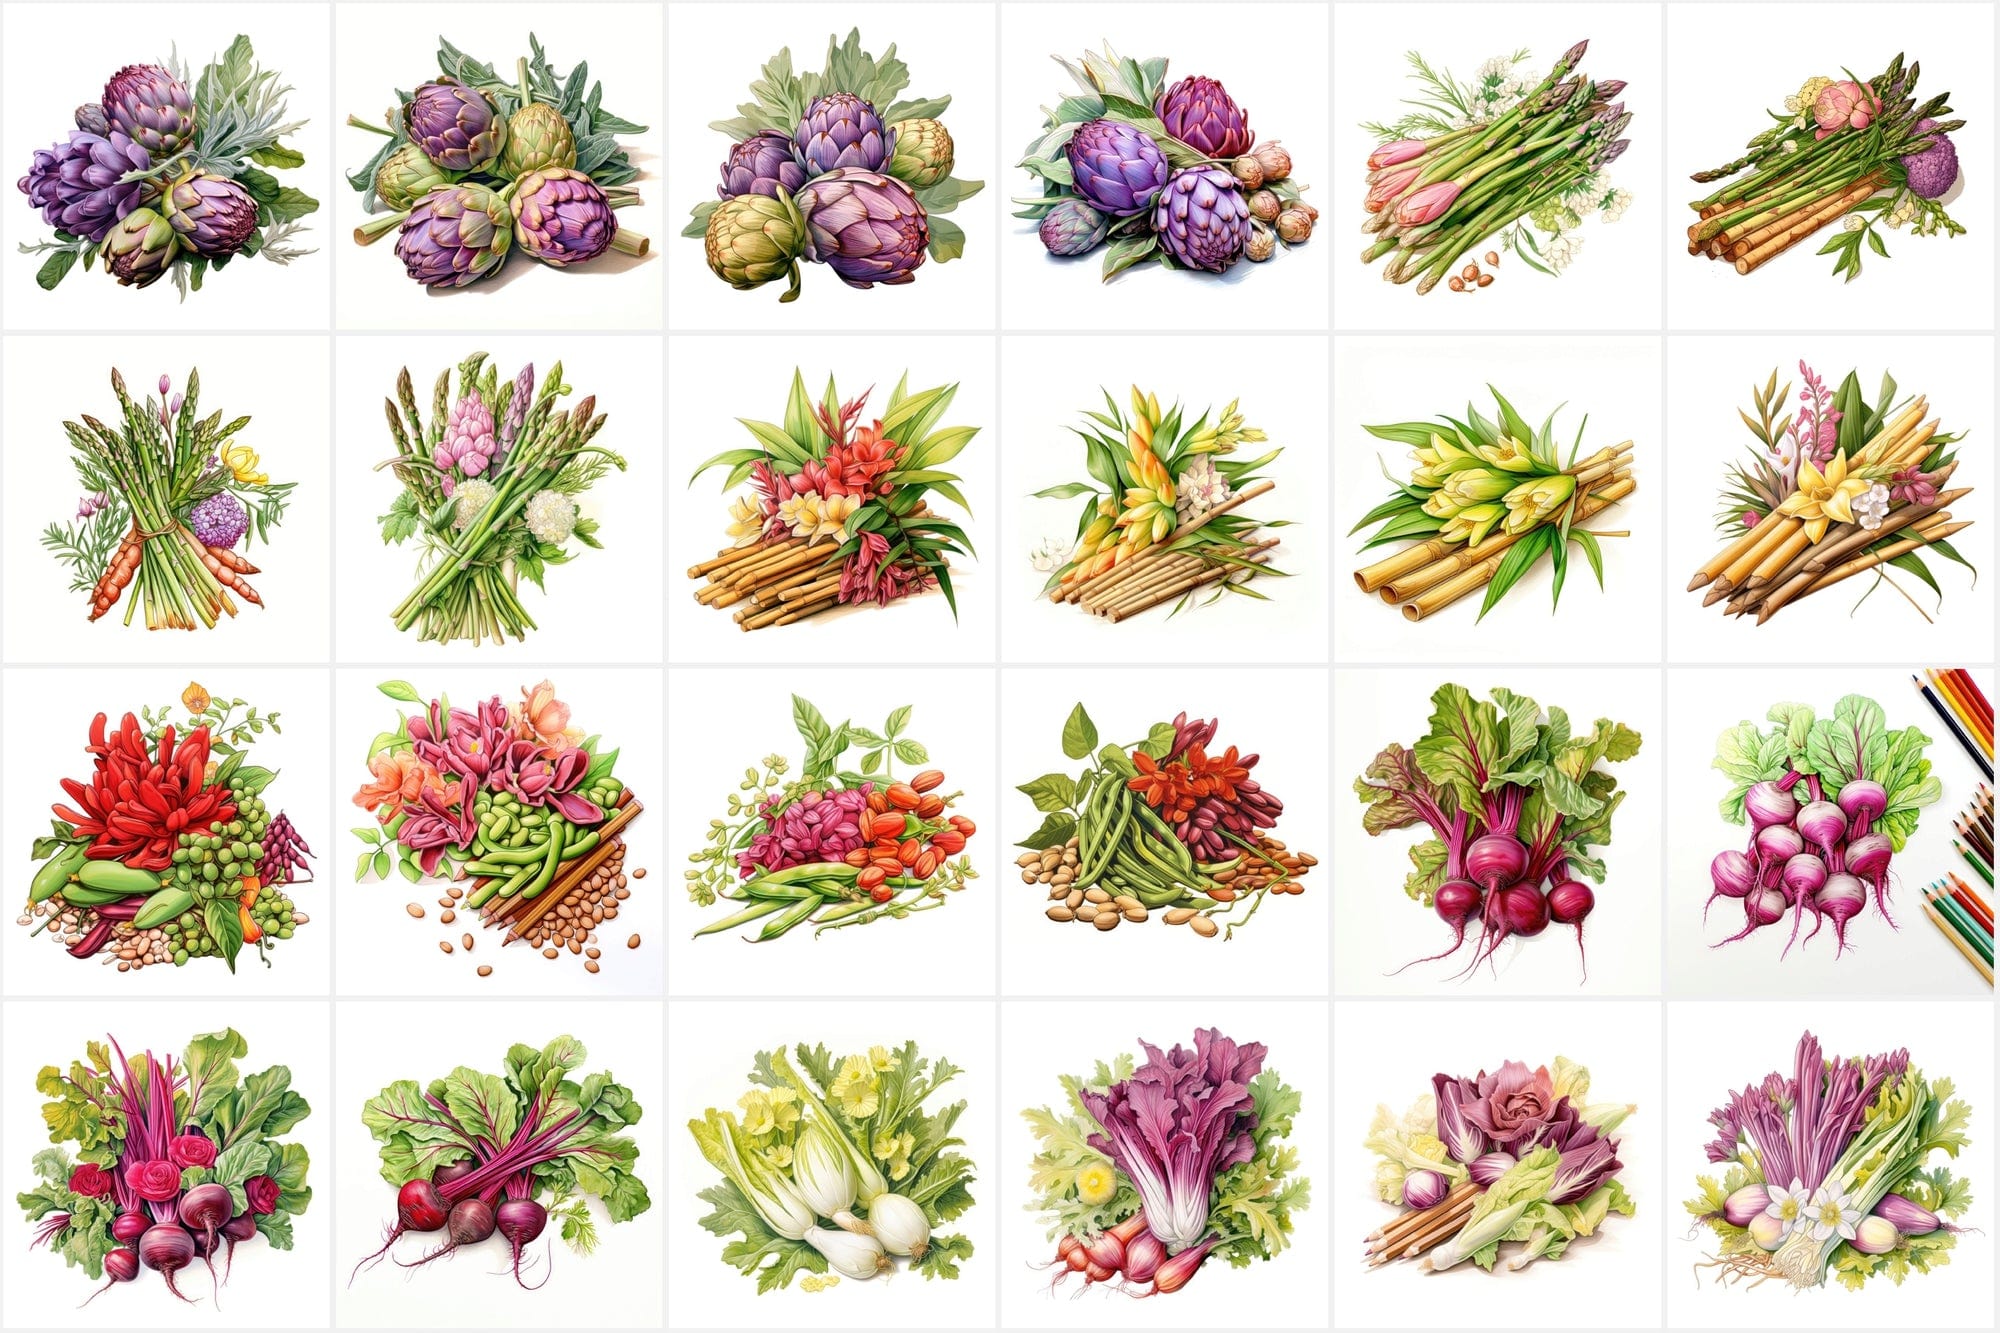 Colorful Vegetable Images with Flowers & Leaves - High Resolution PNG Files with Commercial License Digital Download Sumobundle